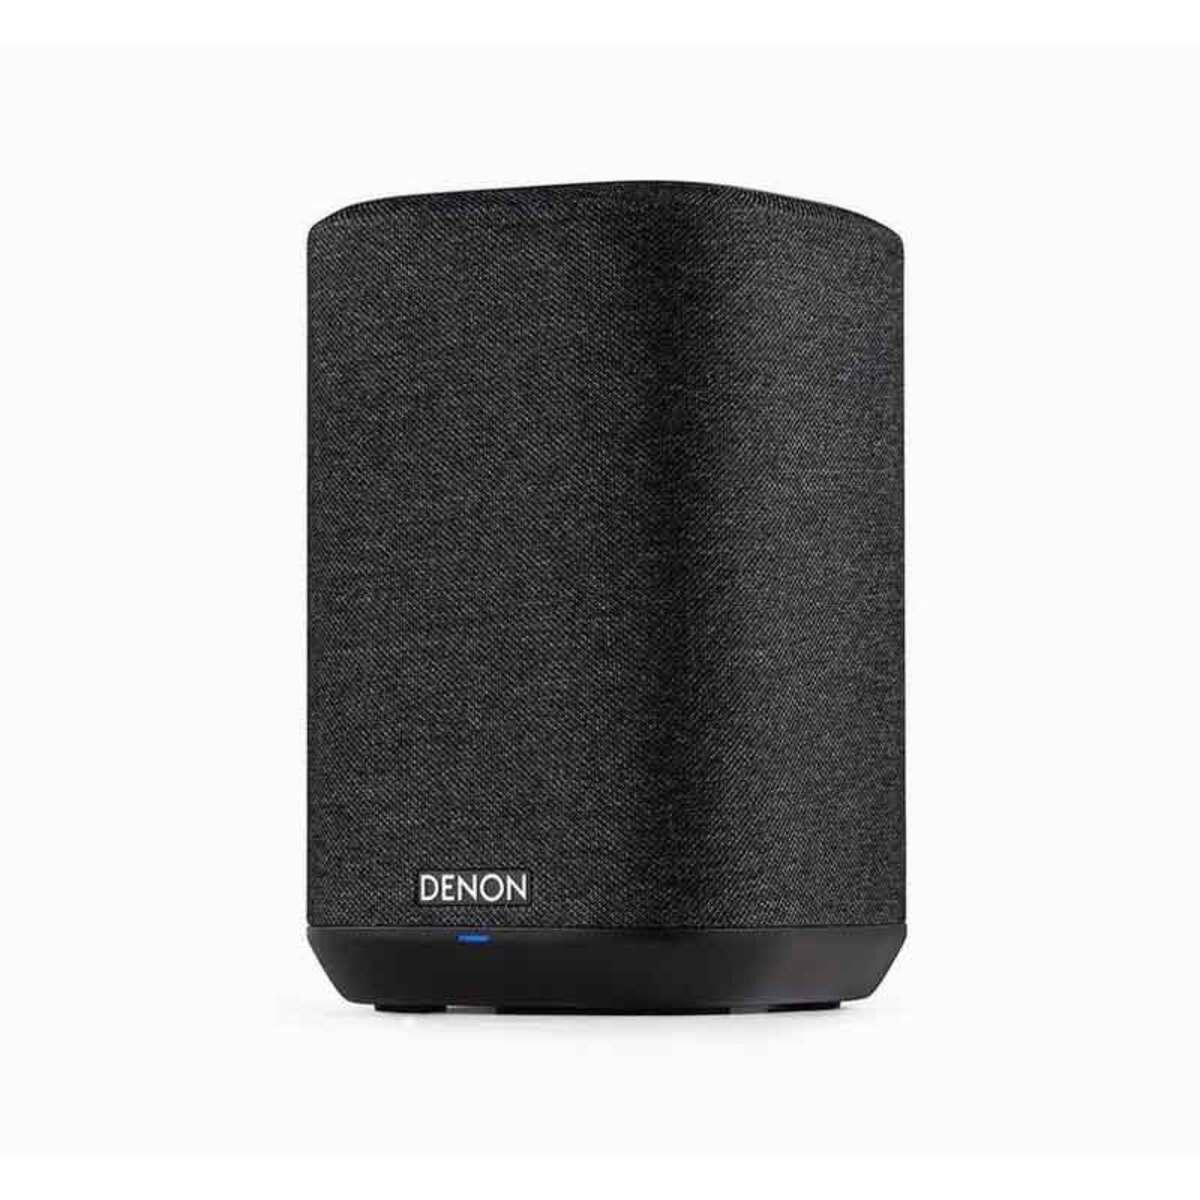 DENON Home 150 Black Compact Smart Speaker with HEOS Built-in, Black